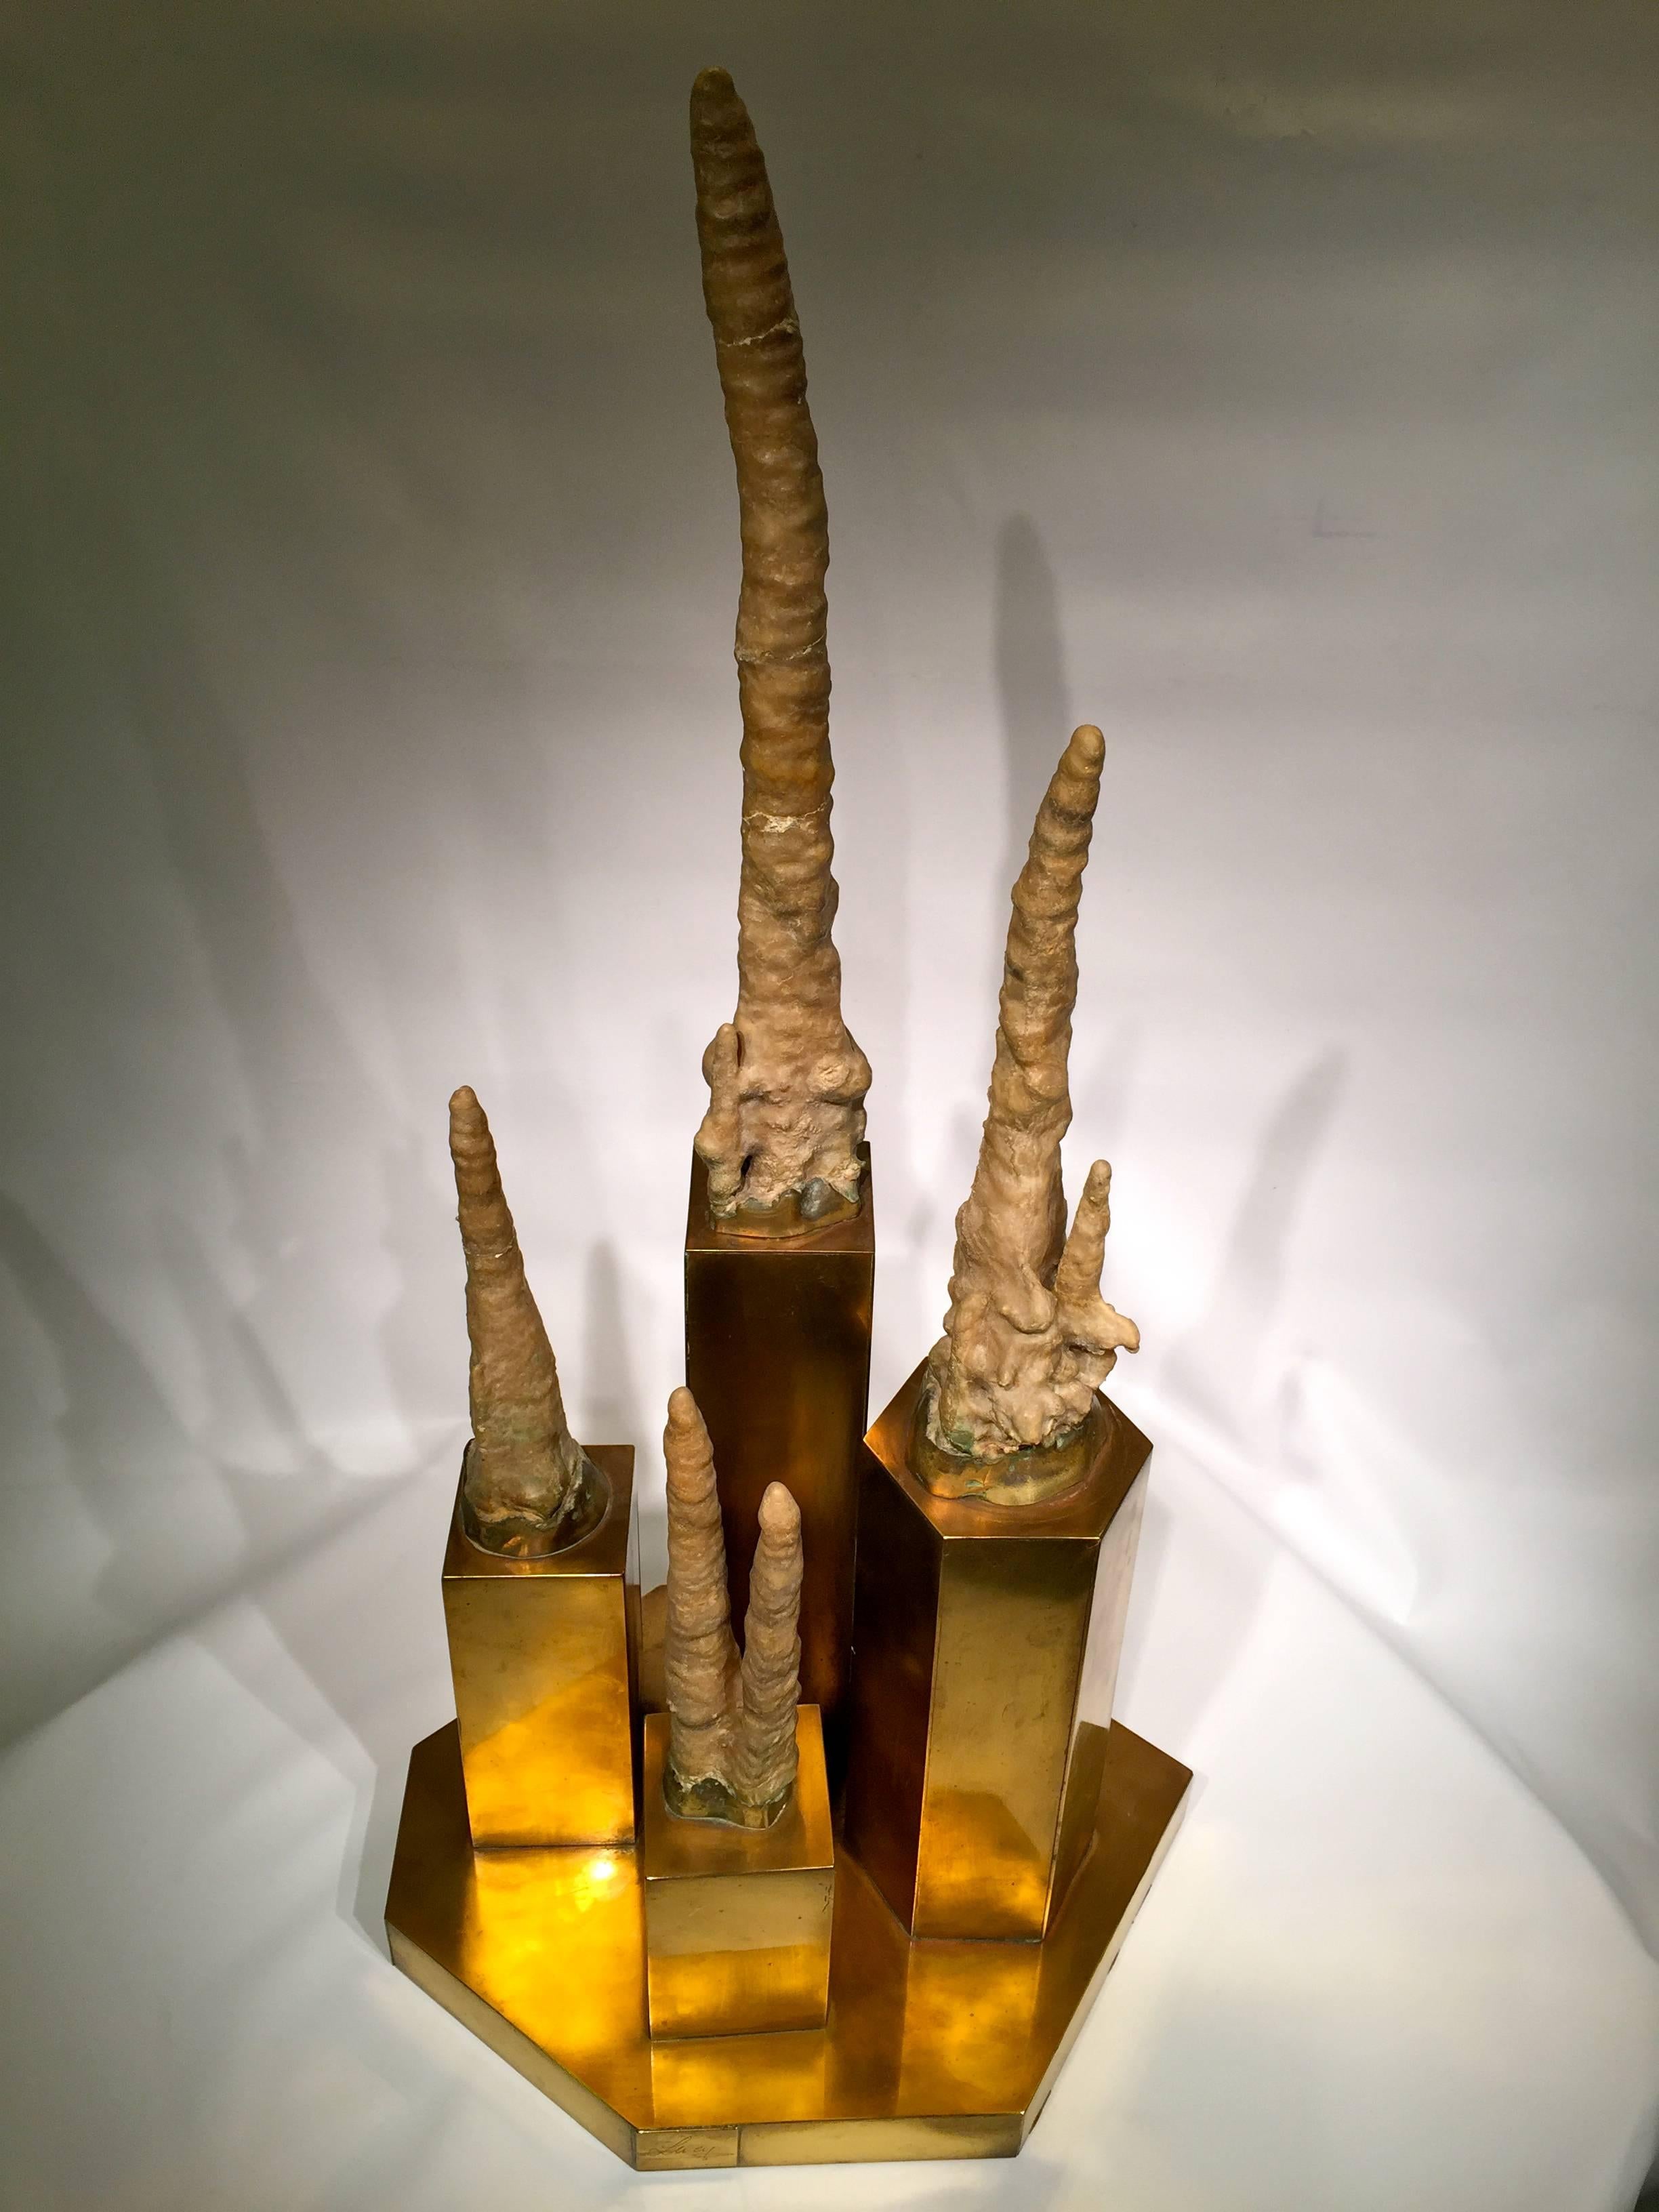 LUCY BLOCH Brazil Sculpture with Stalagmites and Bronze 